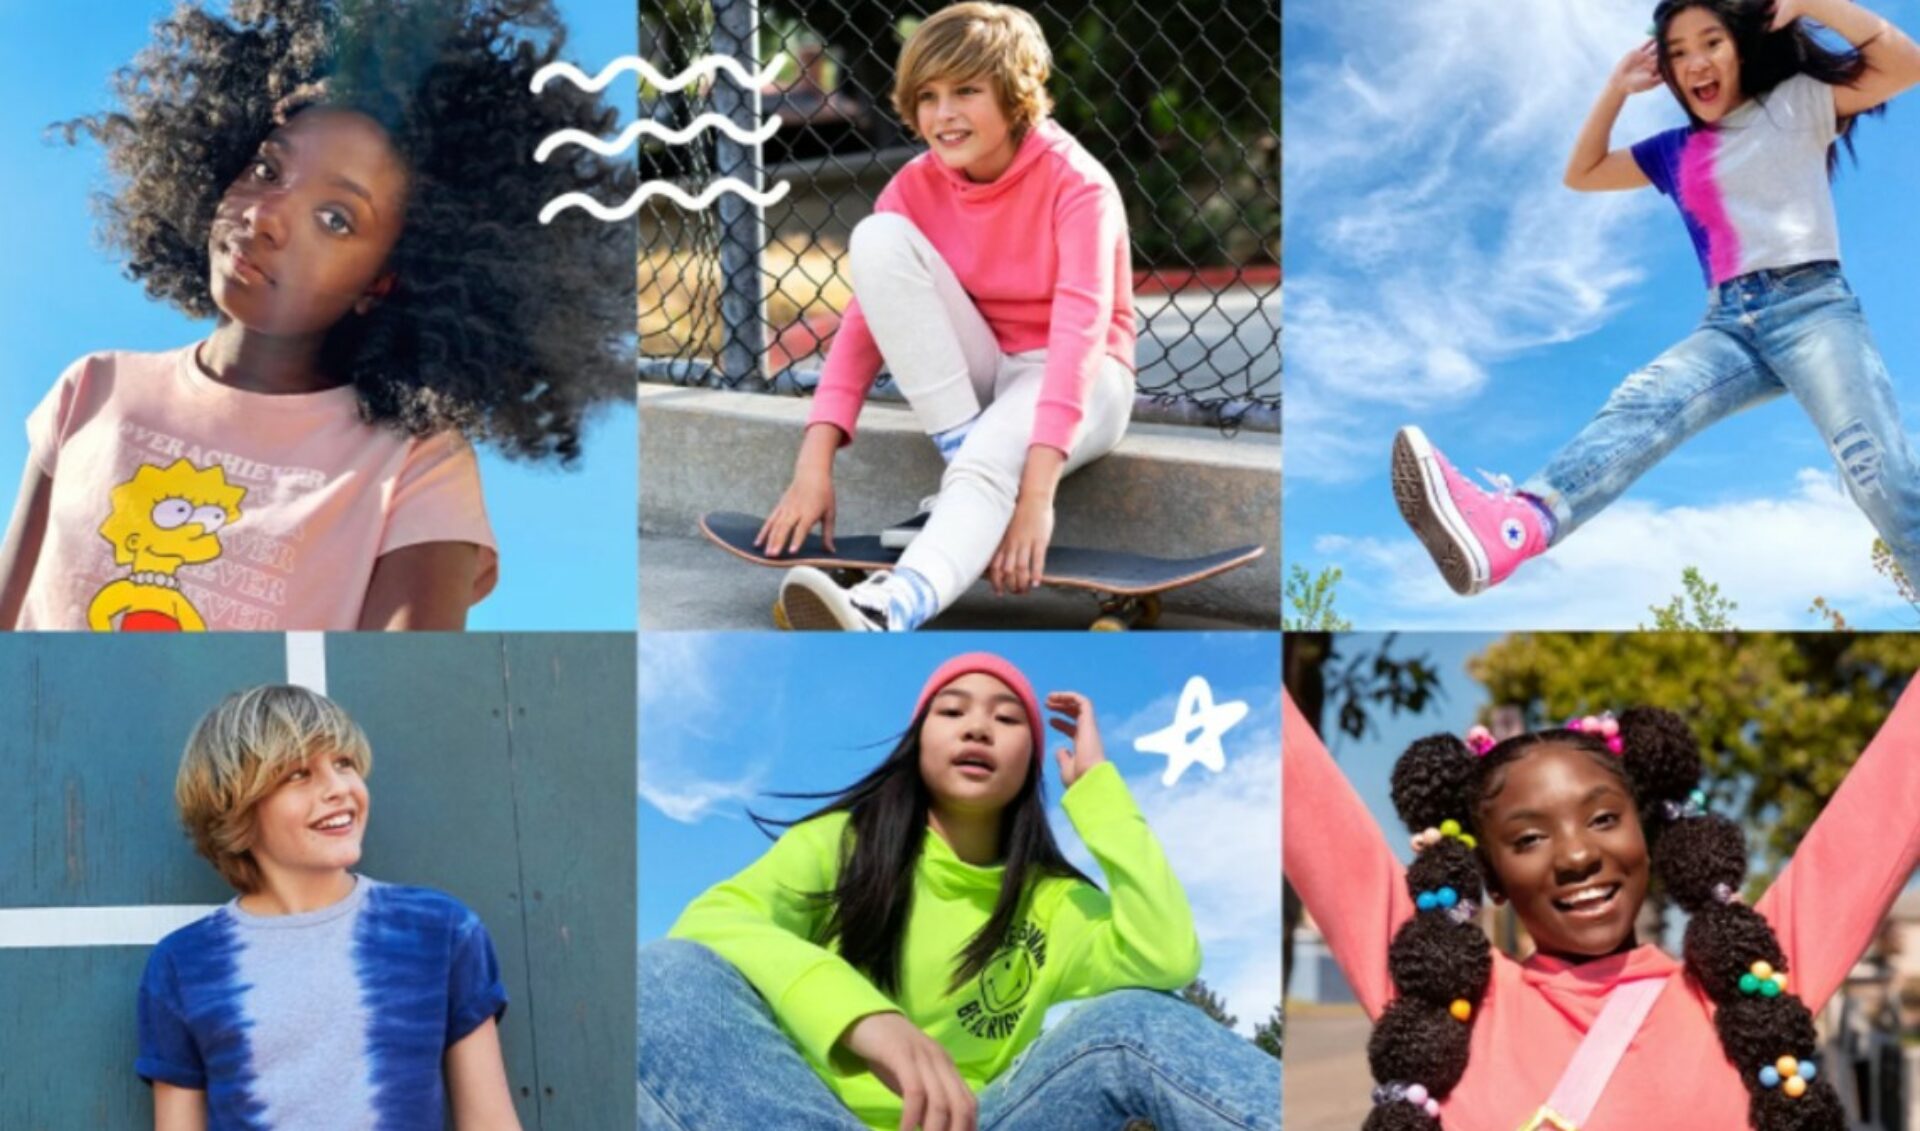 PopSugar Pairs With Old Navy To Launch Gender-Inclusive Clothing Line For Tweens